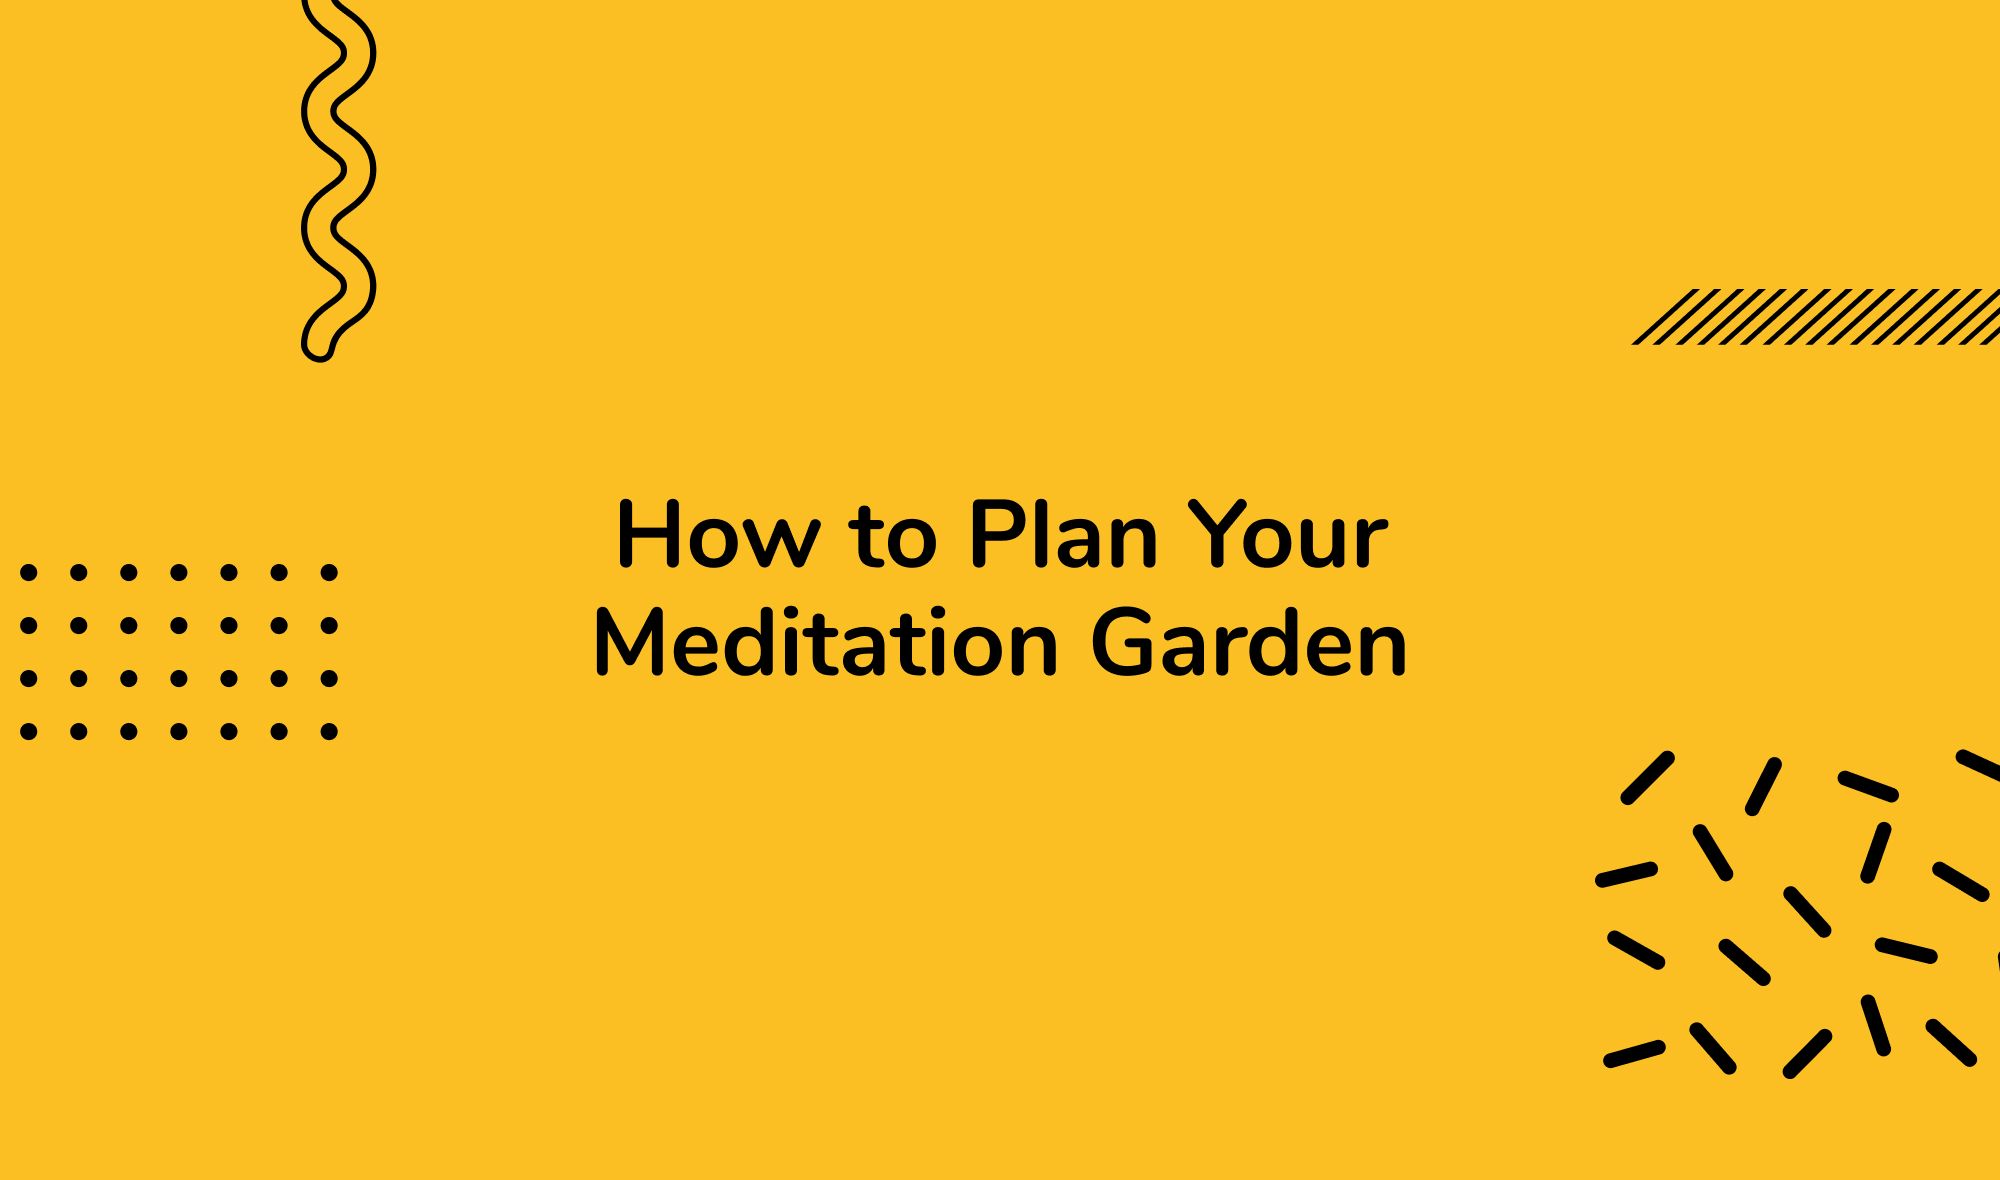 How to Plan Your Meditation Garden: A Step-by-Step Guide